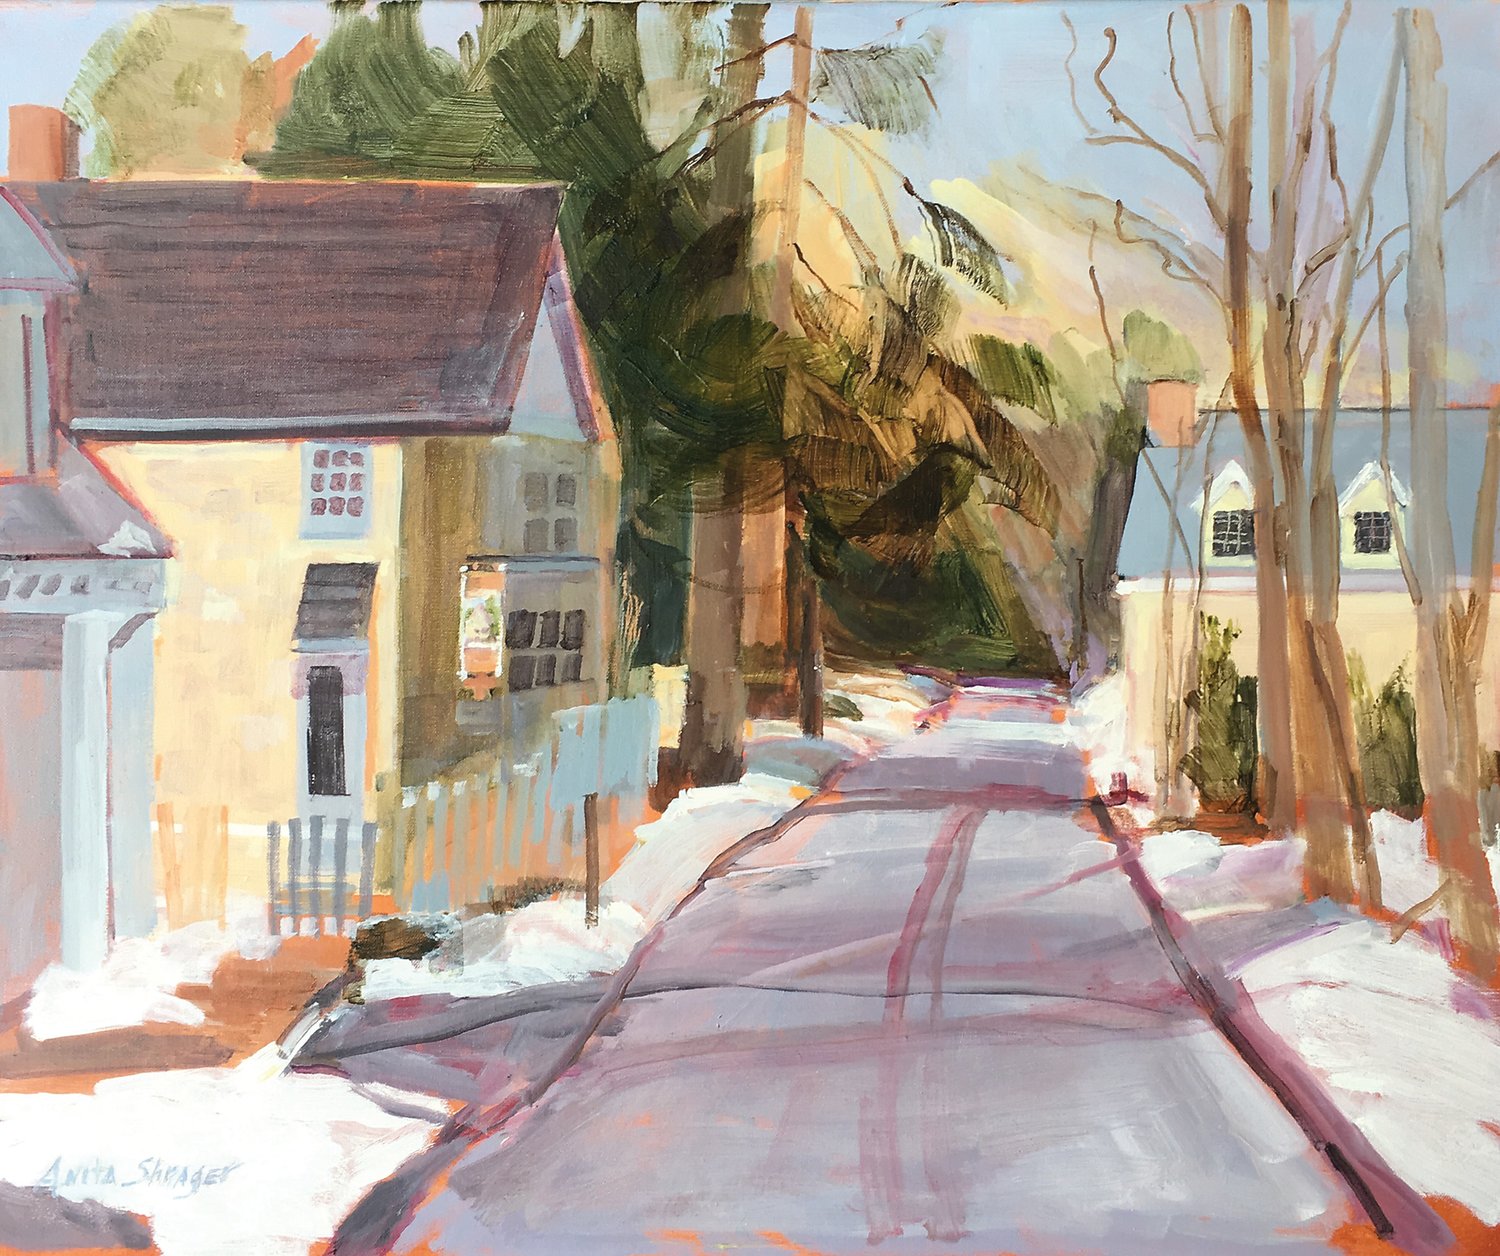 “Fleecydale Road” by Anita Shrager is an oil on linen, part of her solo show at the Silverman Gallery of Bucks County Impressionist Art.